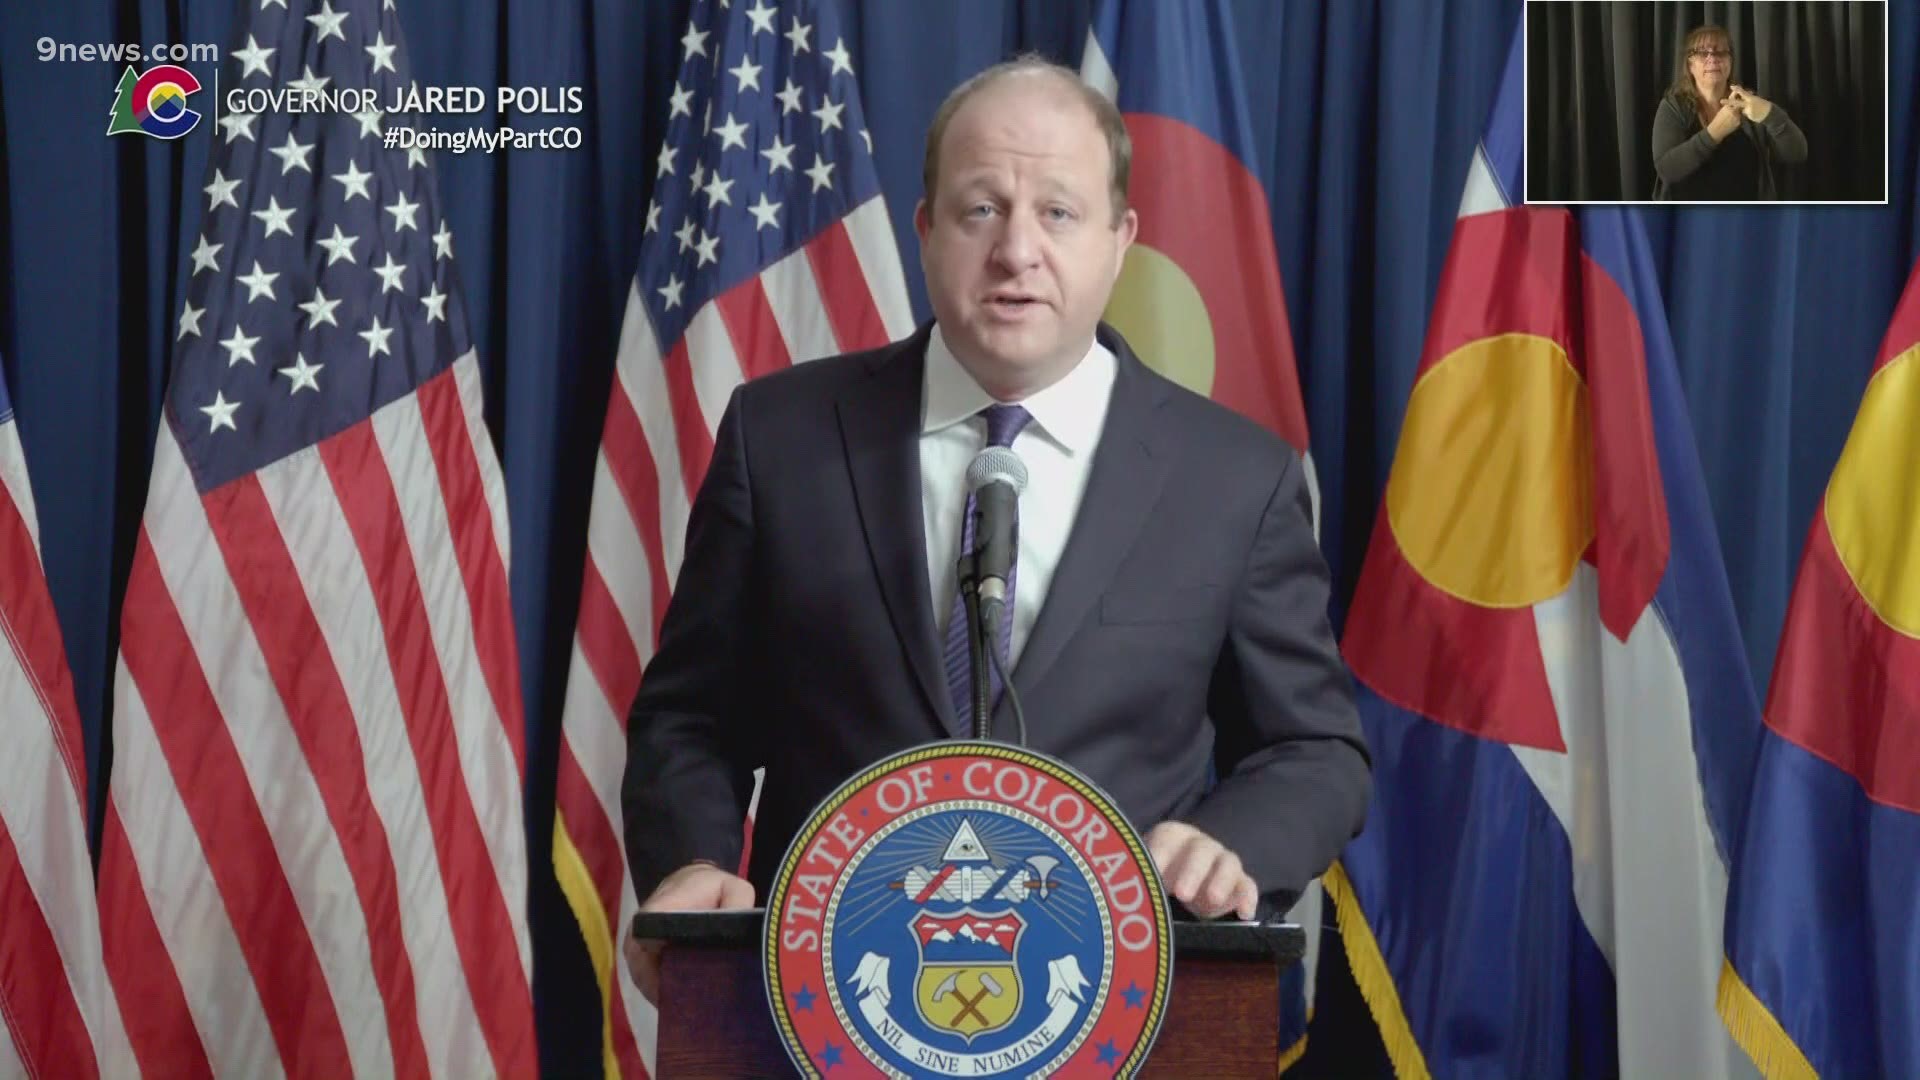 The governor said in an update Friday that Colorado residents need to keep themselves and their family safe over the Thanksgiving holiday.